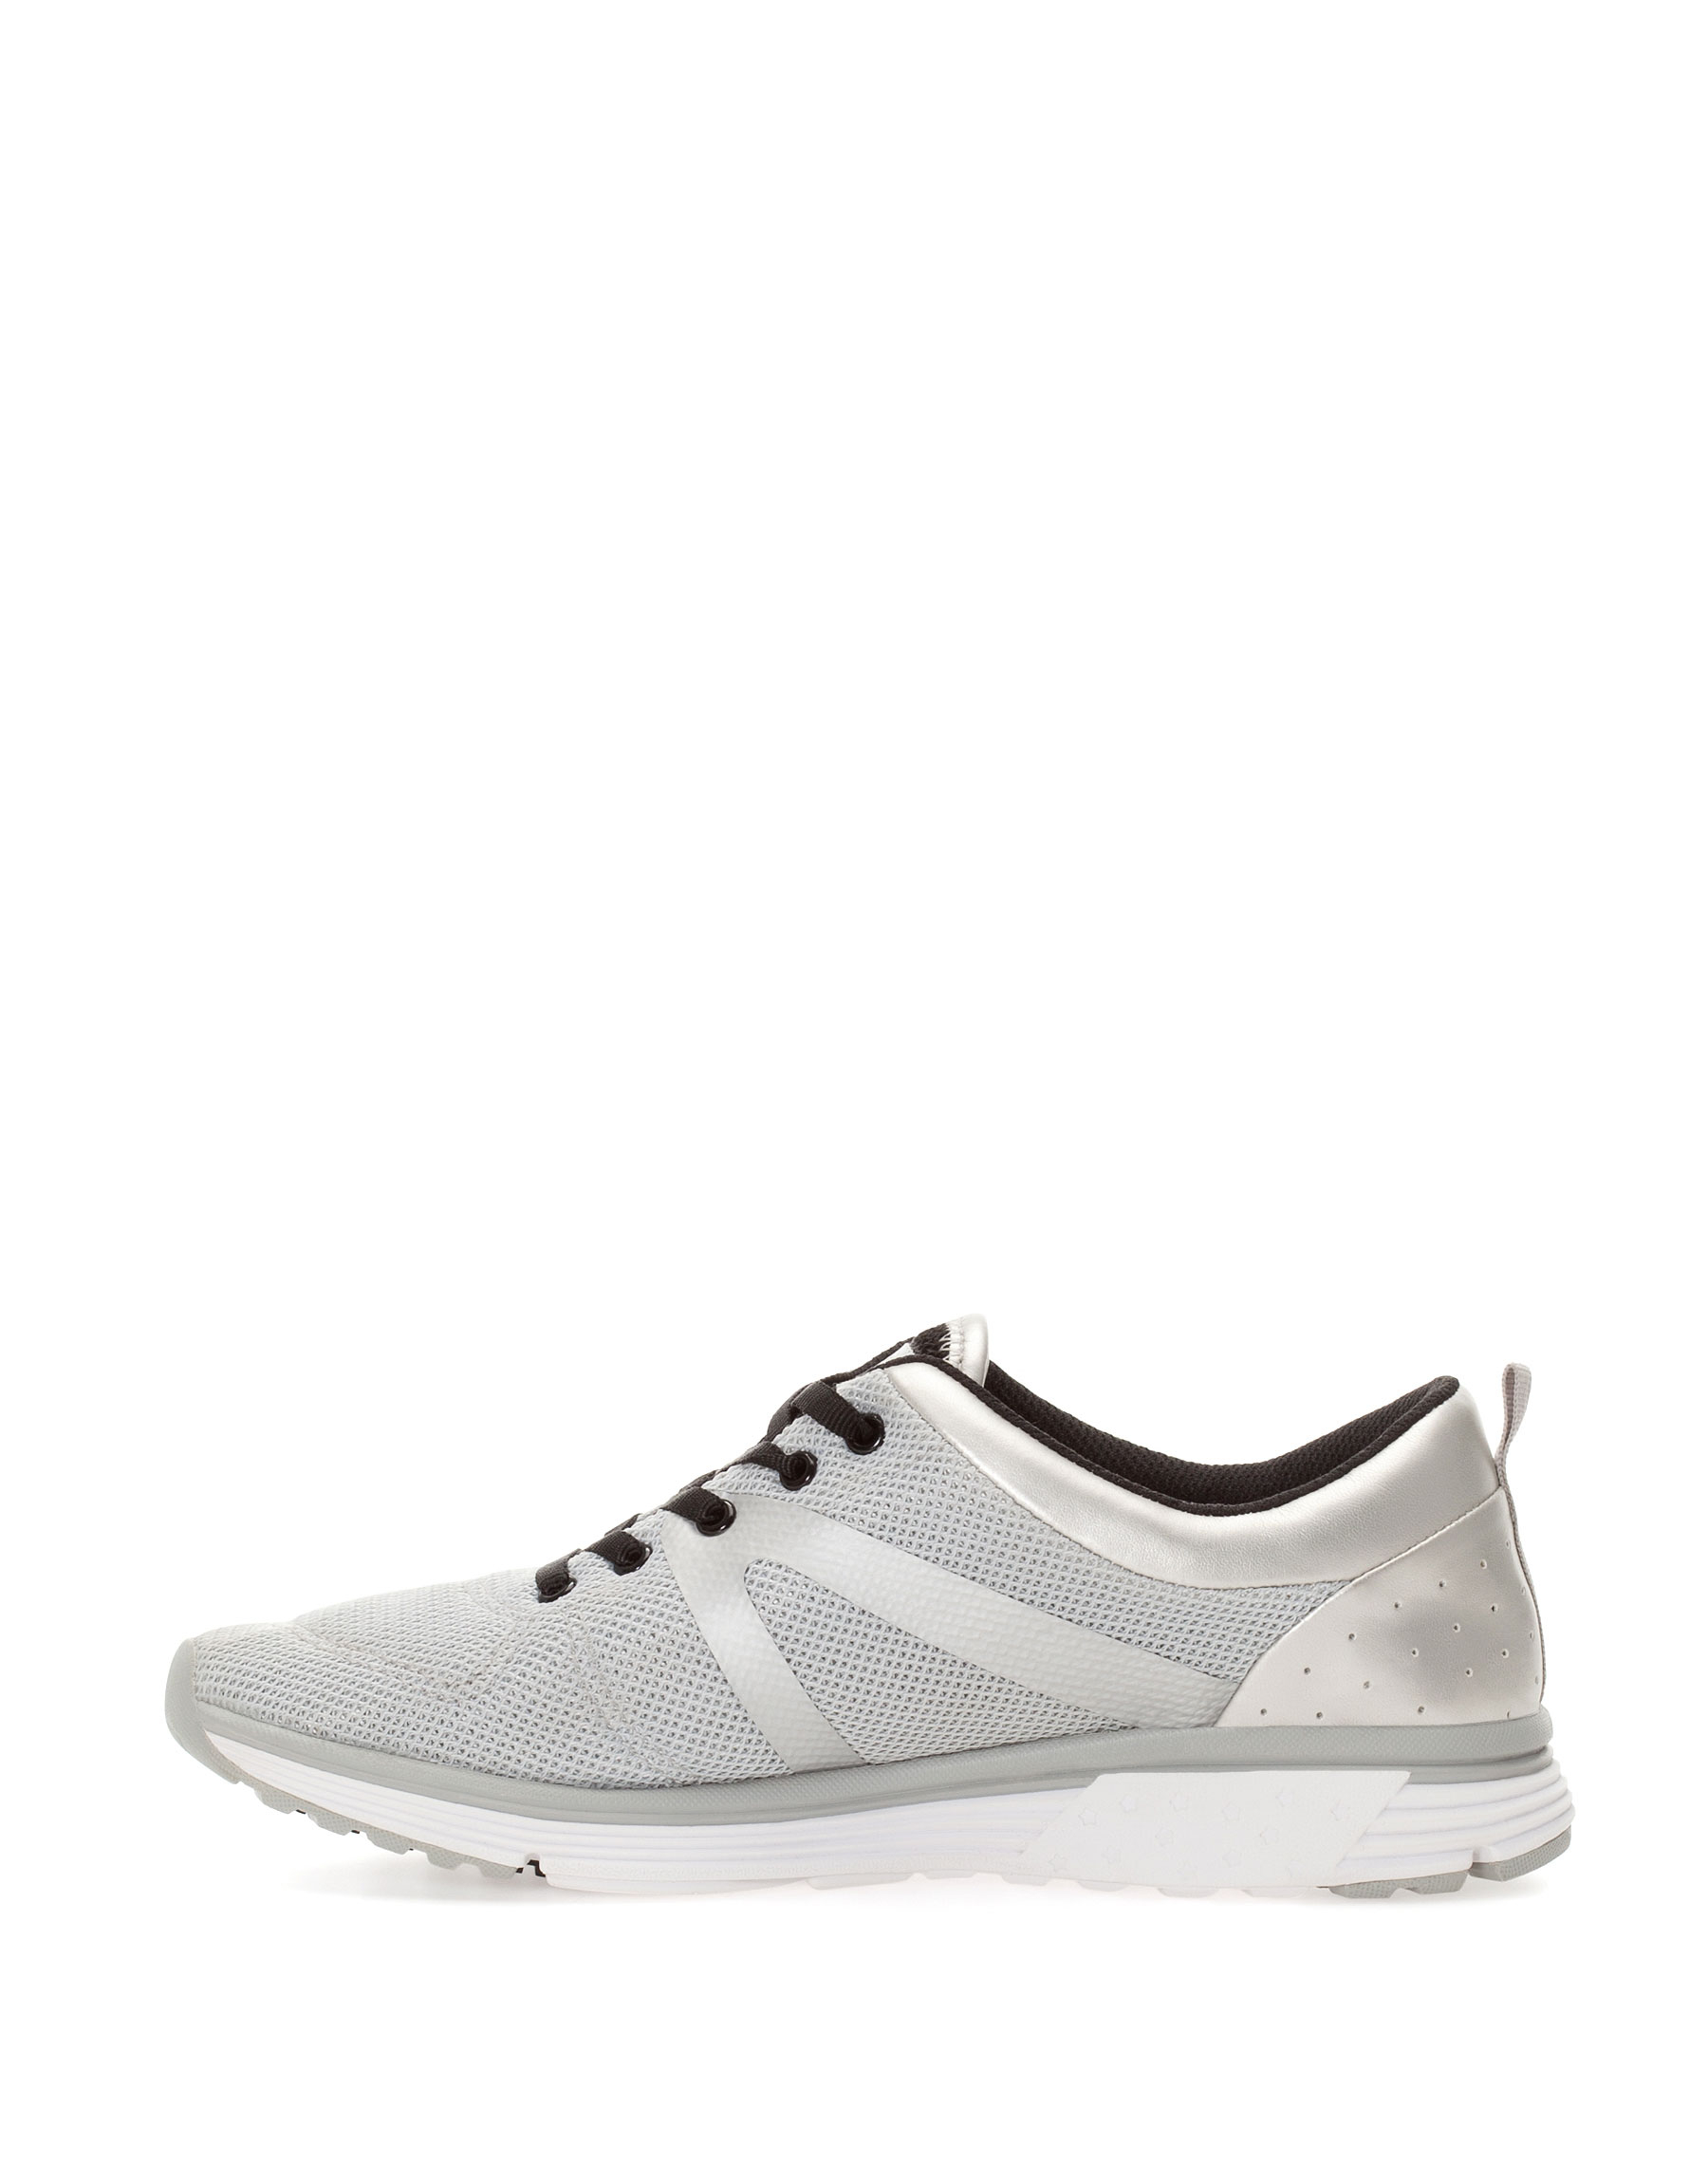 Pull&bear Combined Jogging Shoes in Silver | Lyst